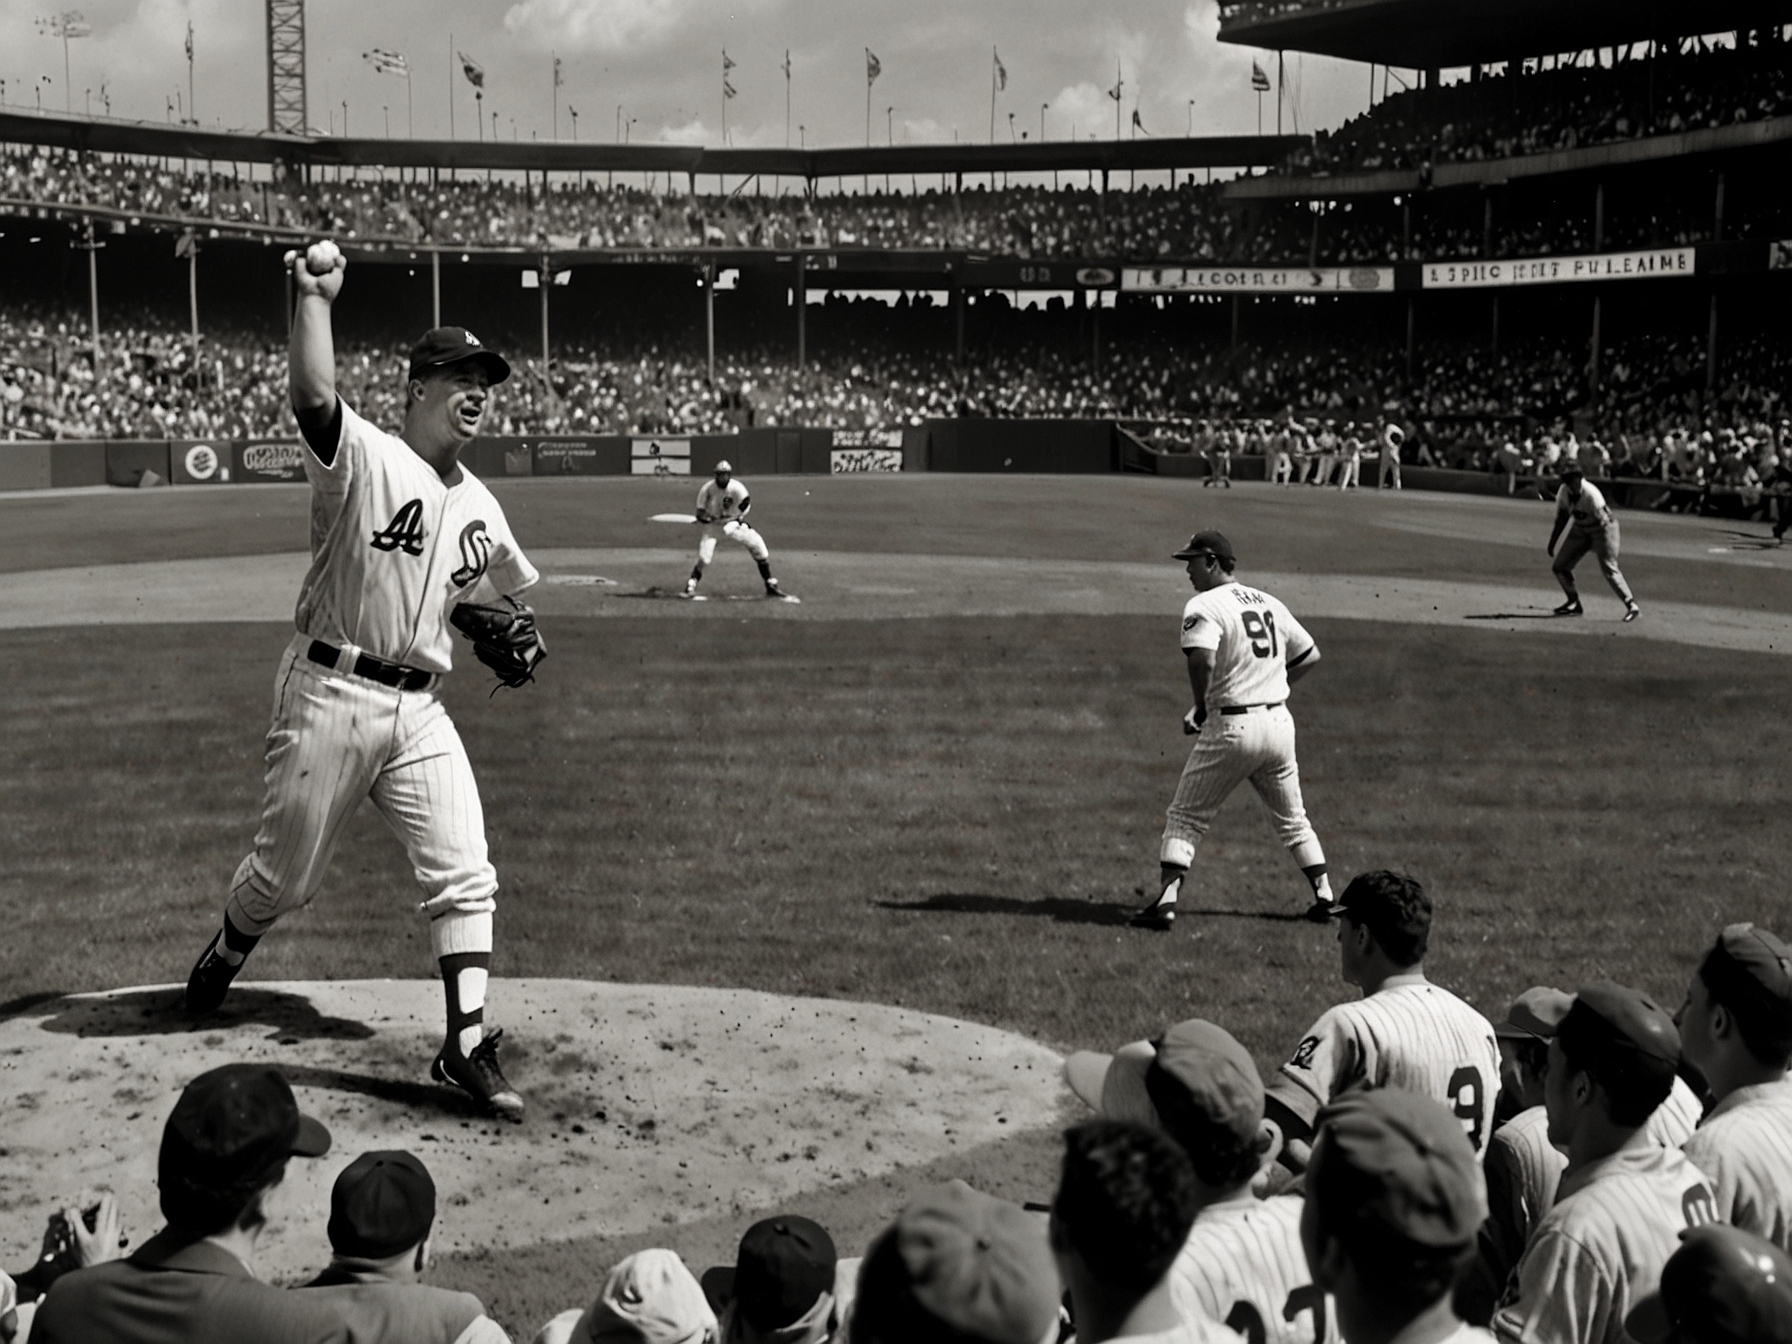 A dramatic shot of Jim Bunning on the mound at Shea Stadium, captured at the moment he throws the final pitch for his perfect game, with fans and teammates in the background.